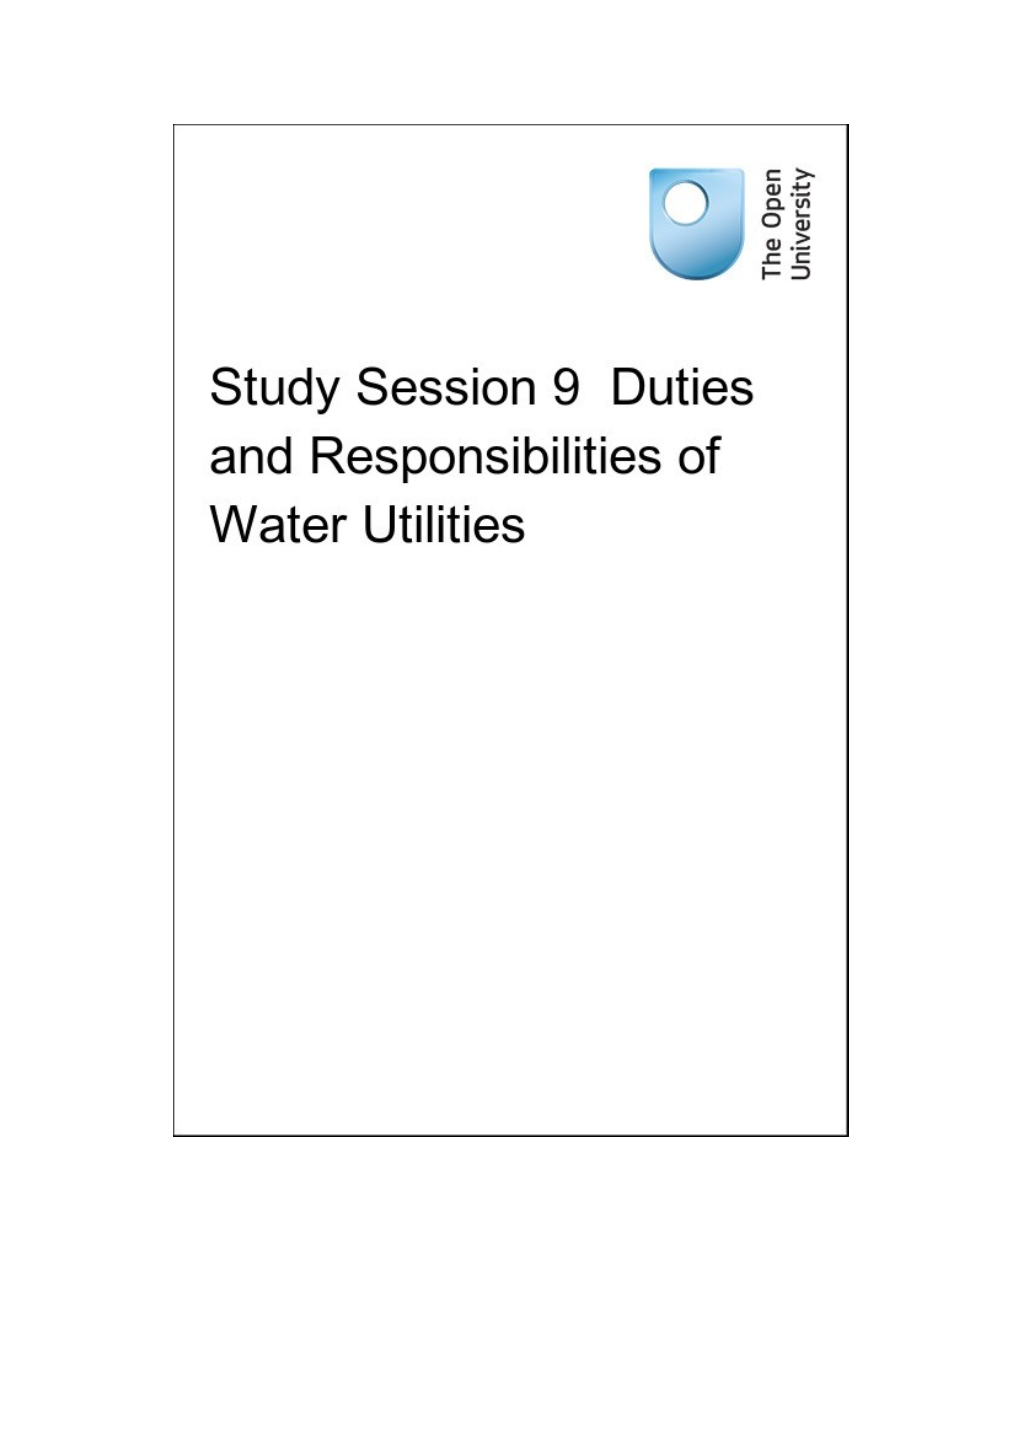 Study Session 9 Duties and Responsibilities of Water Utilities